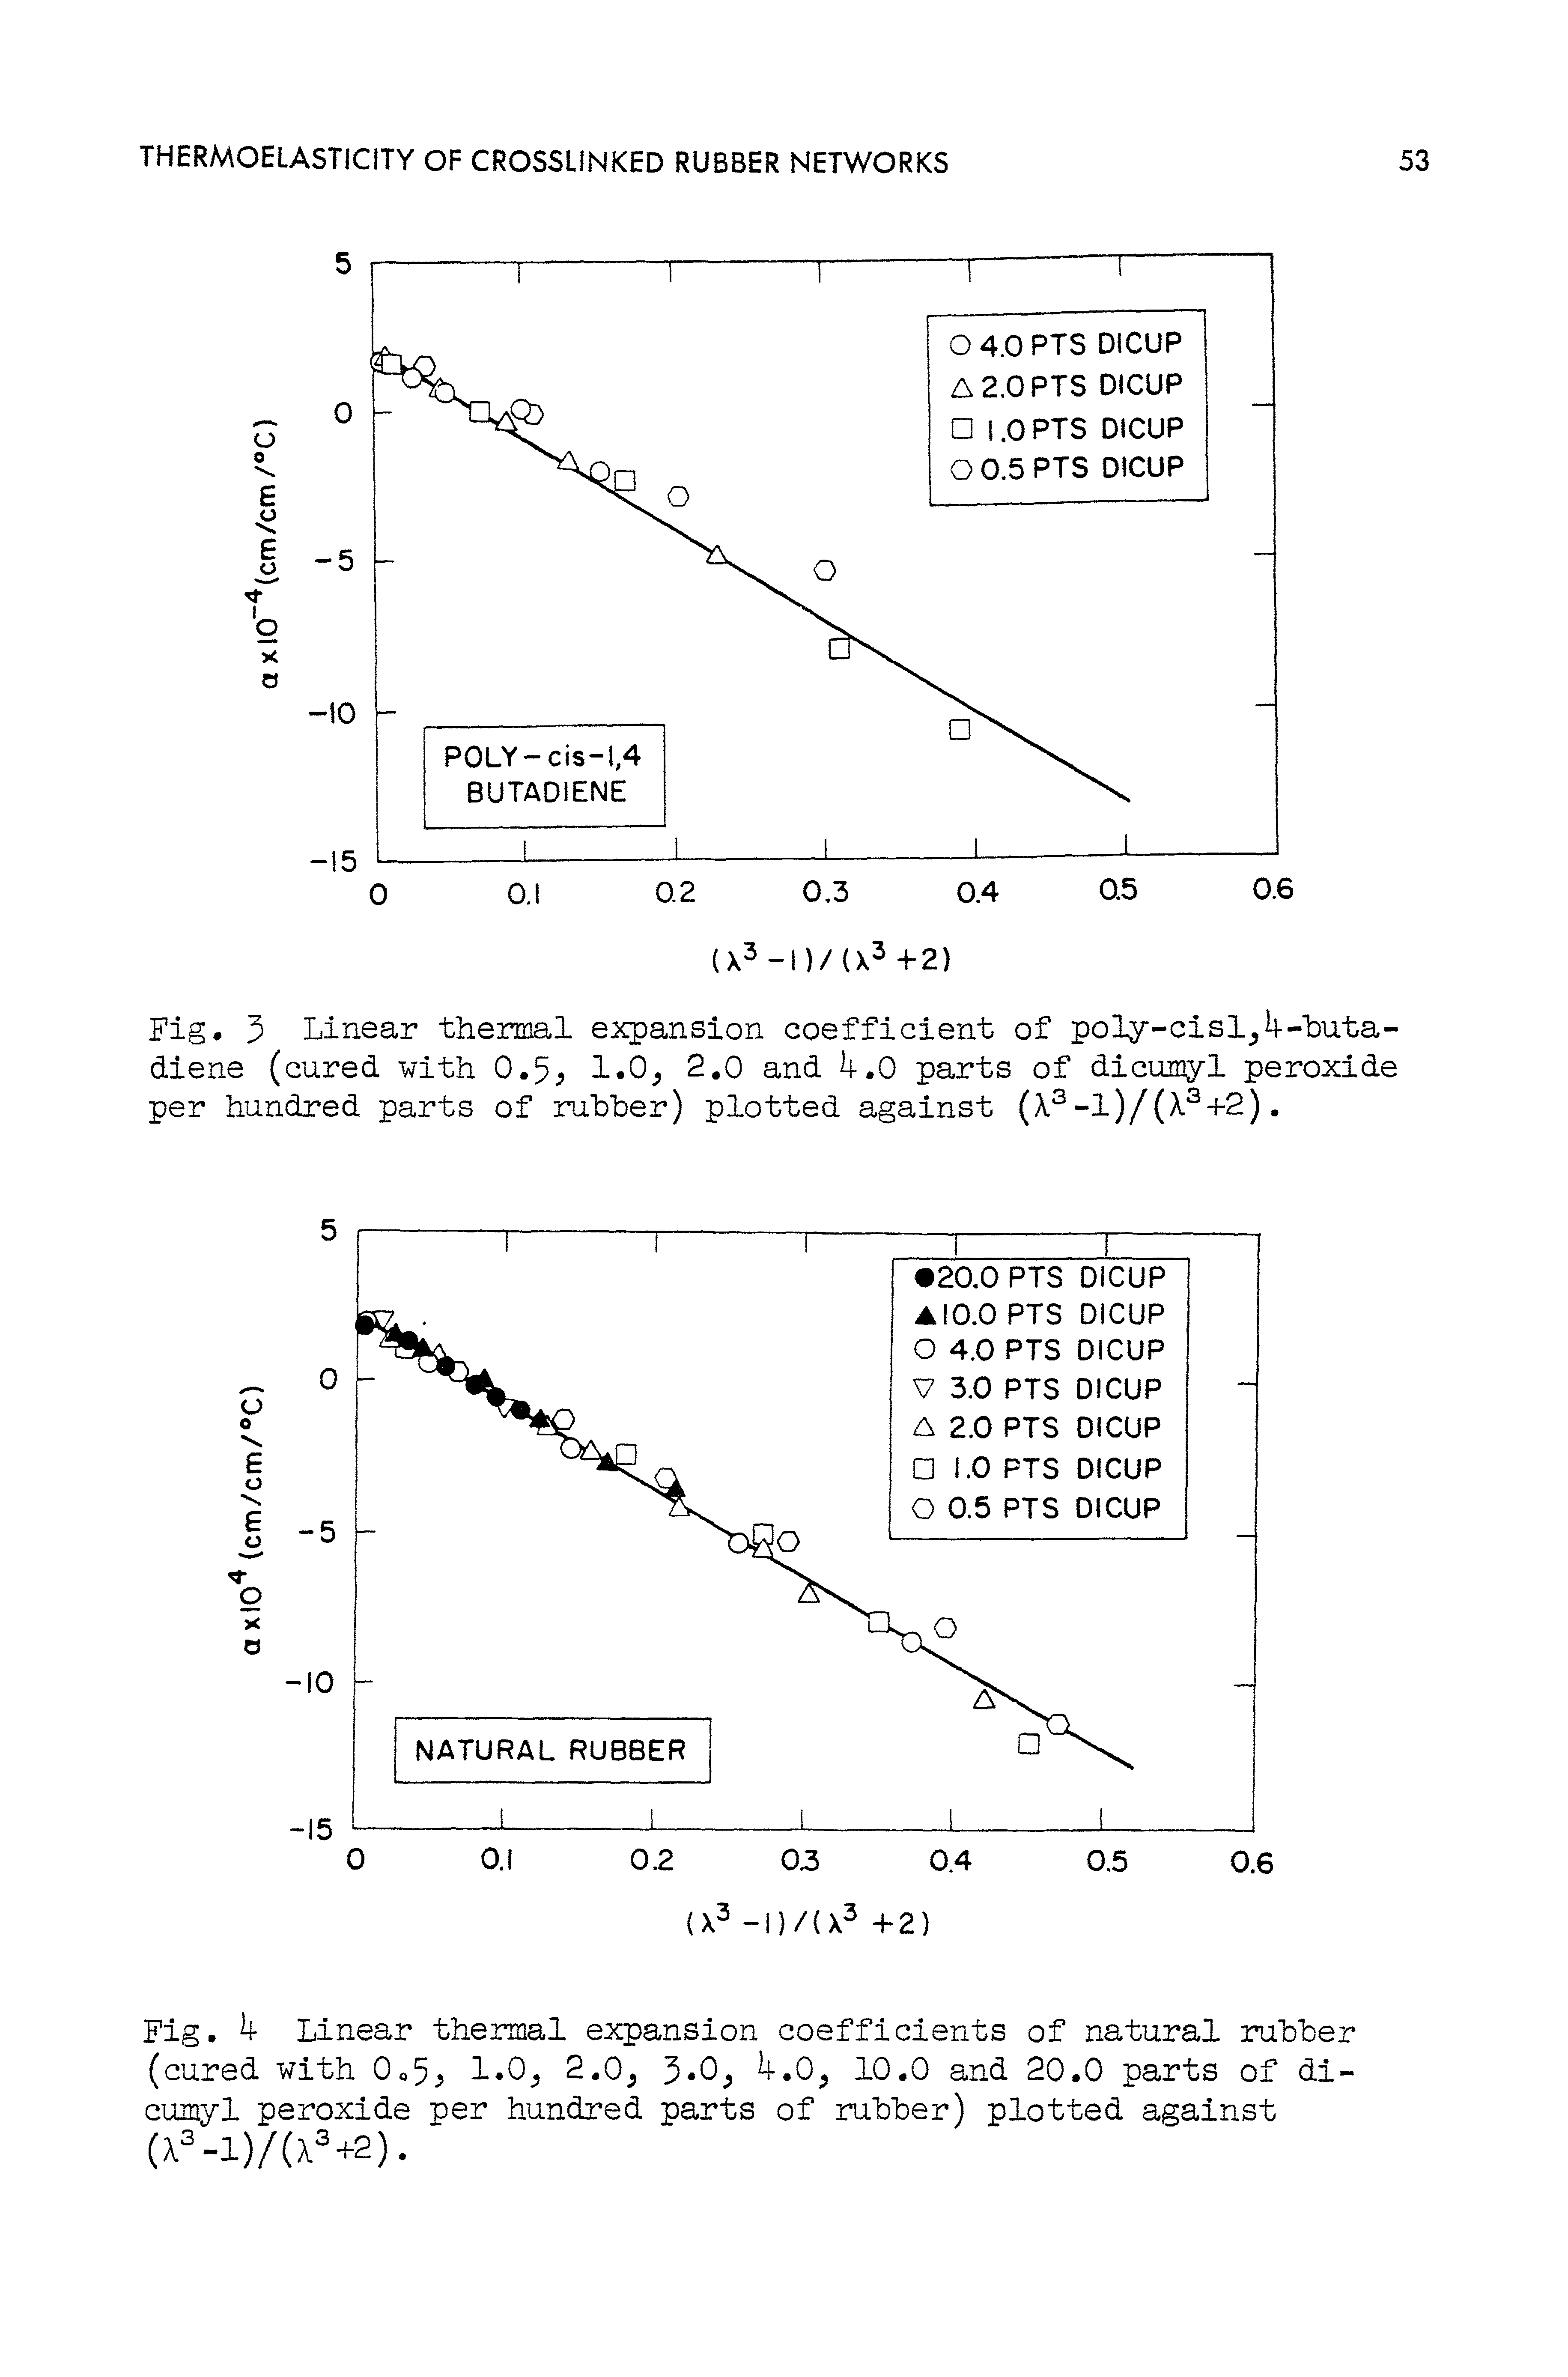 Fig. Linear thermal expansion coefficients of natural rubber (cured with 0o5> 1.0 2.0 3 0. 0, 10.0 and 20.0 parts of di-cumyl peroxide per hundred parts of rubber) plotted against (X=-l)/(X +2).